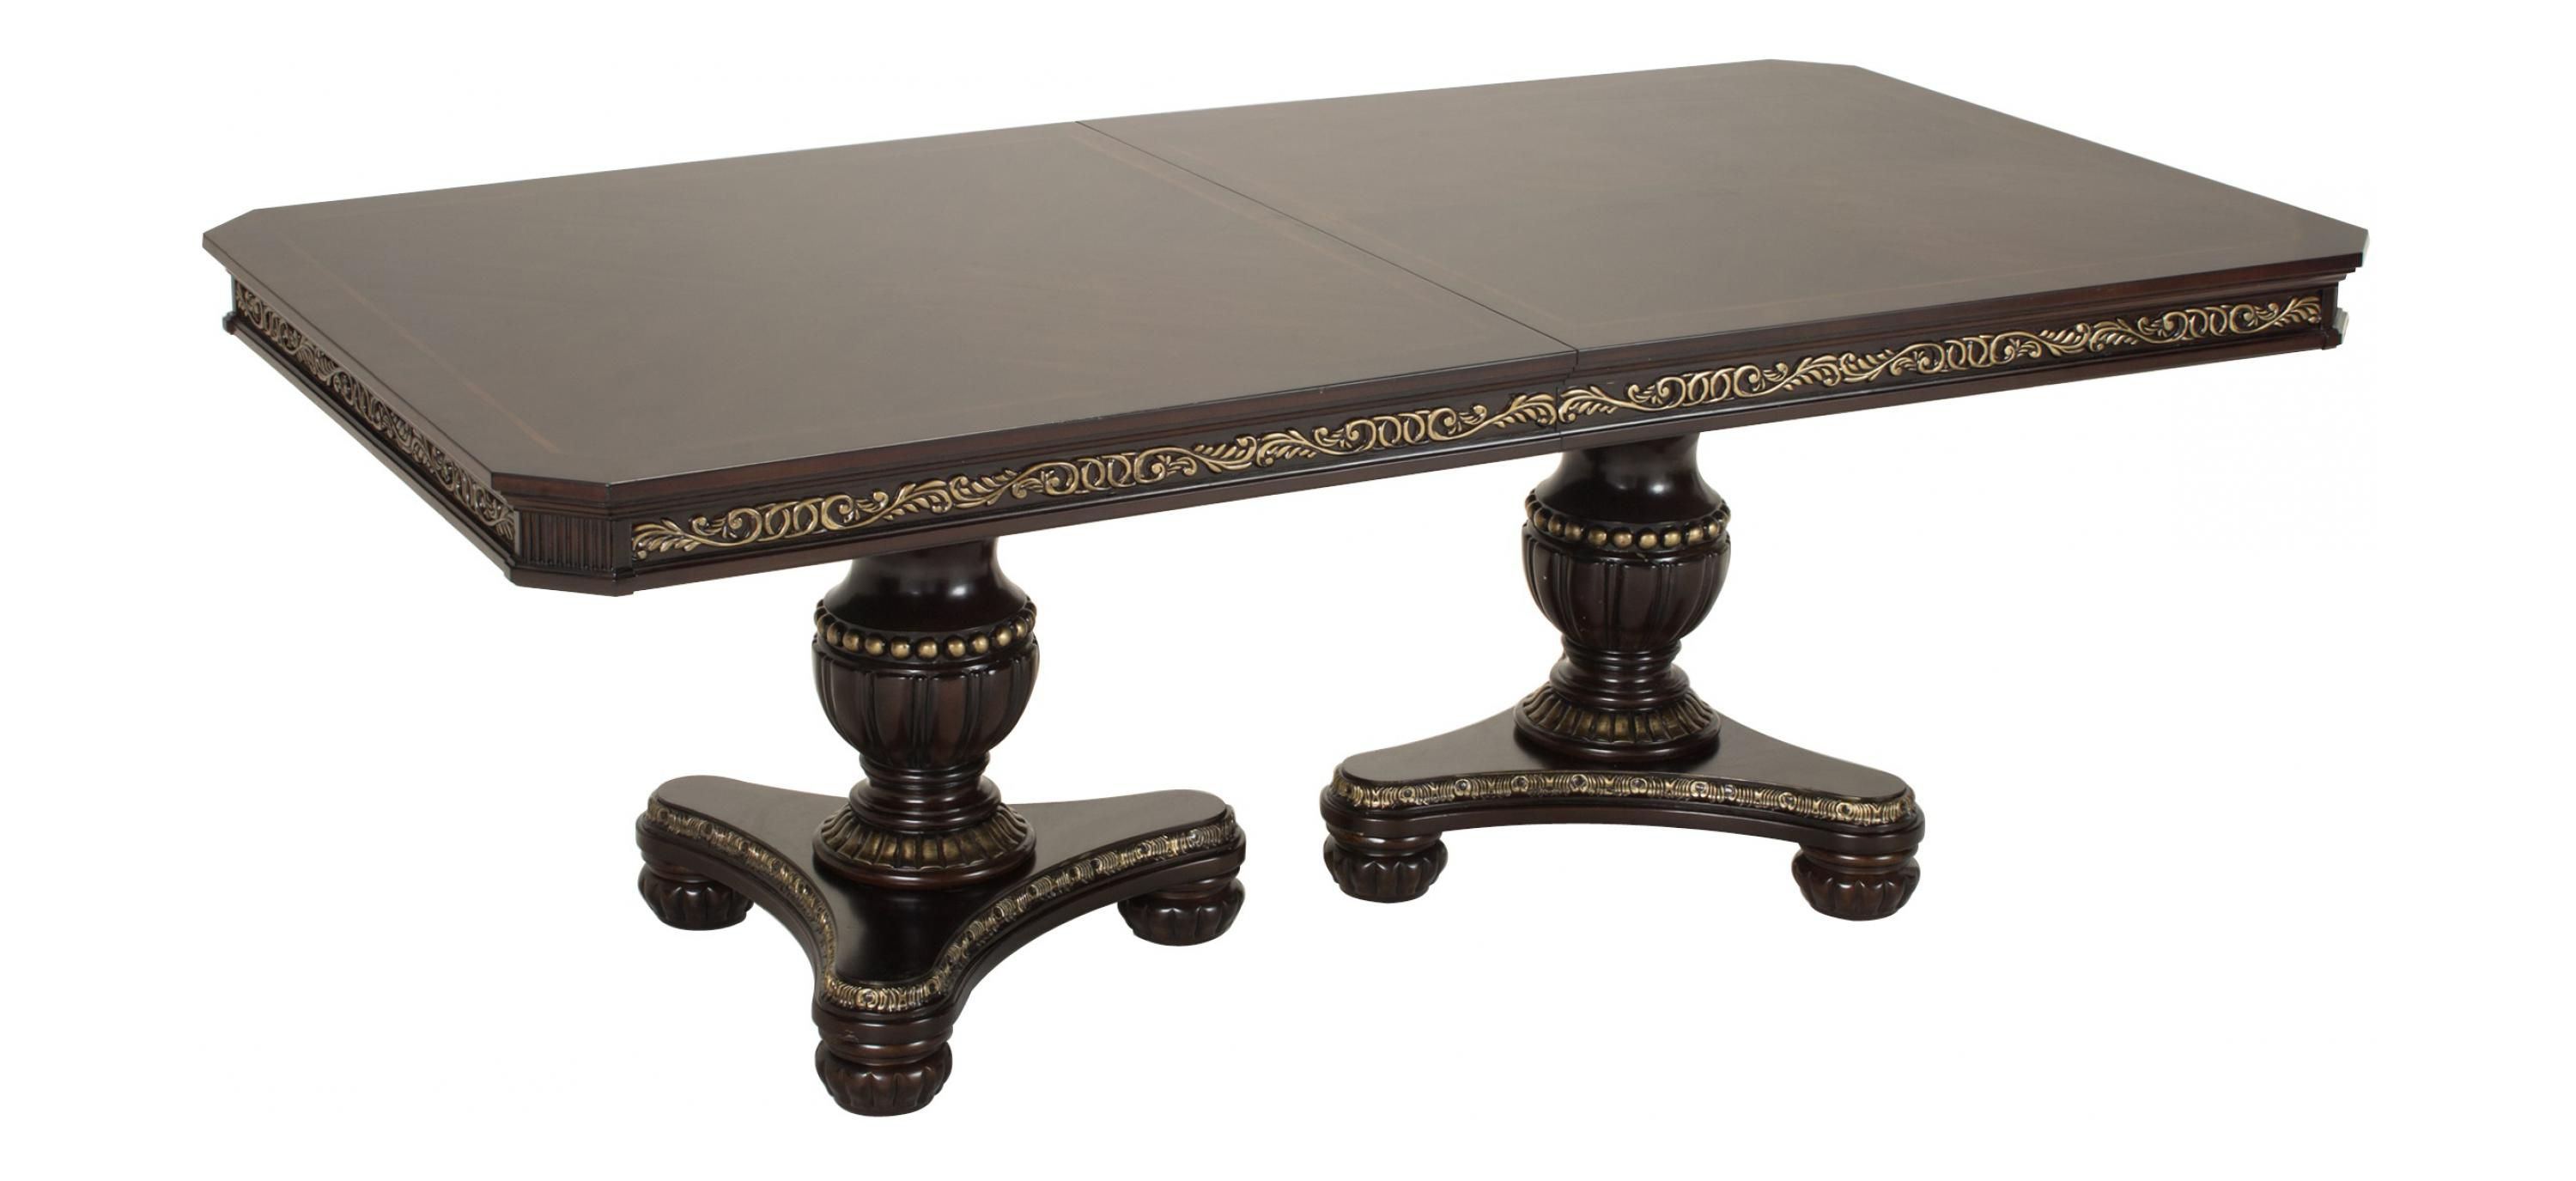 Regal Manor Dining Table w/ Leaves